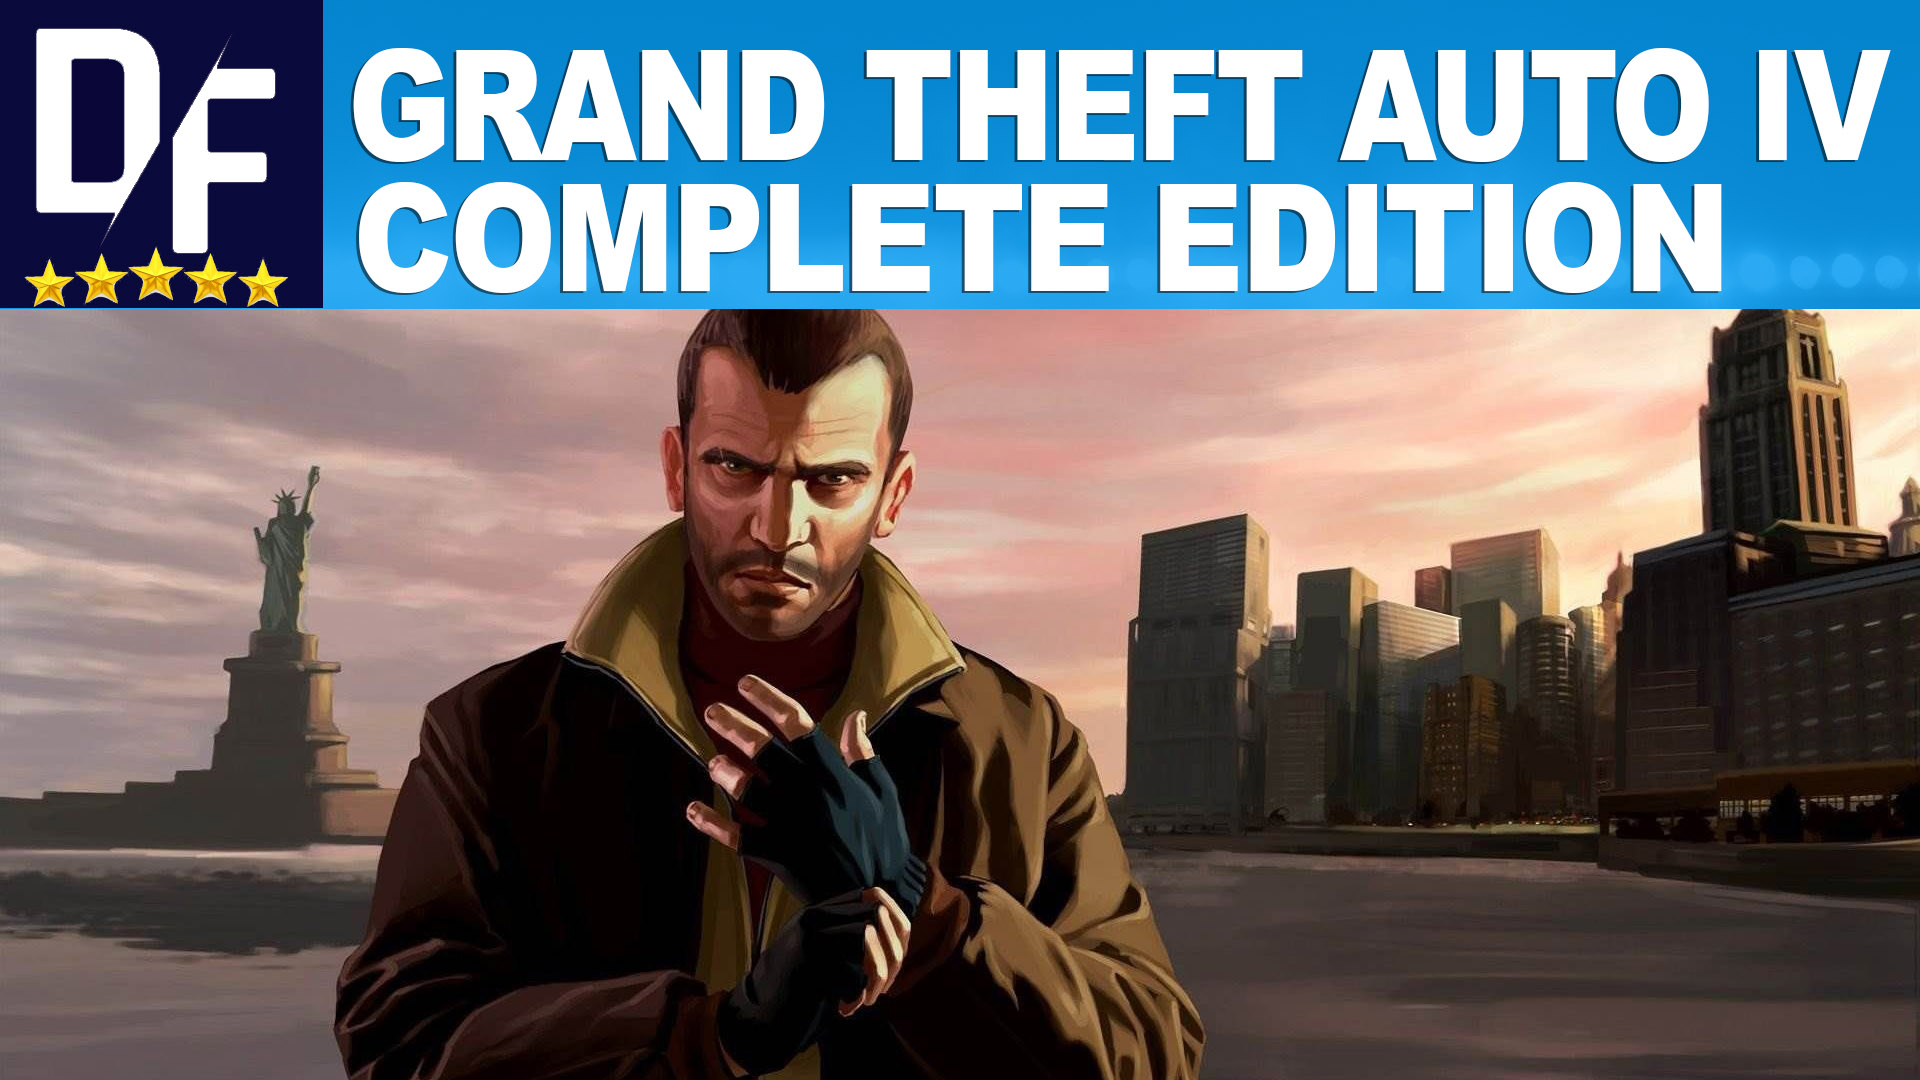 Grand Theft Auto IV: The Complete Edition [STEAM]